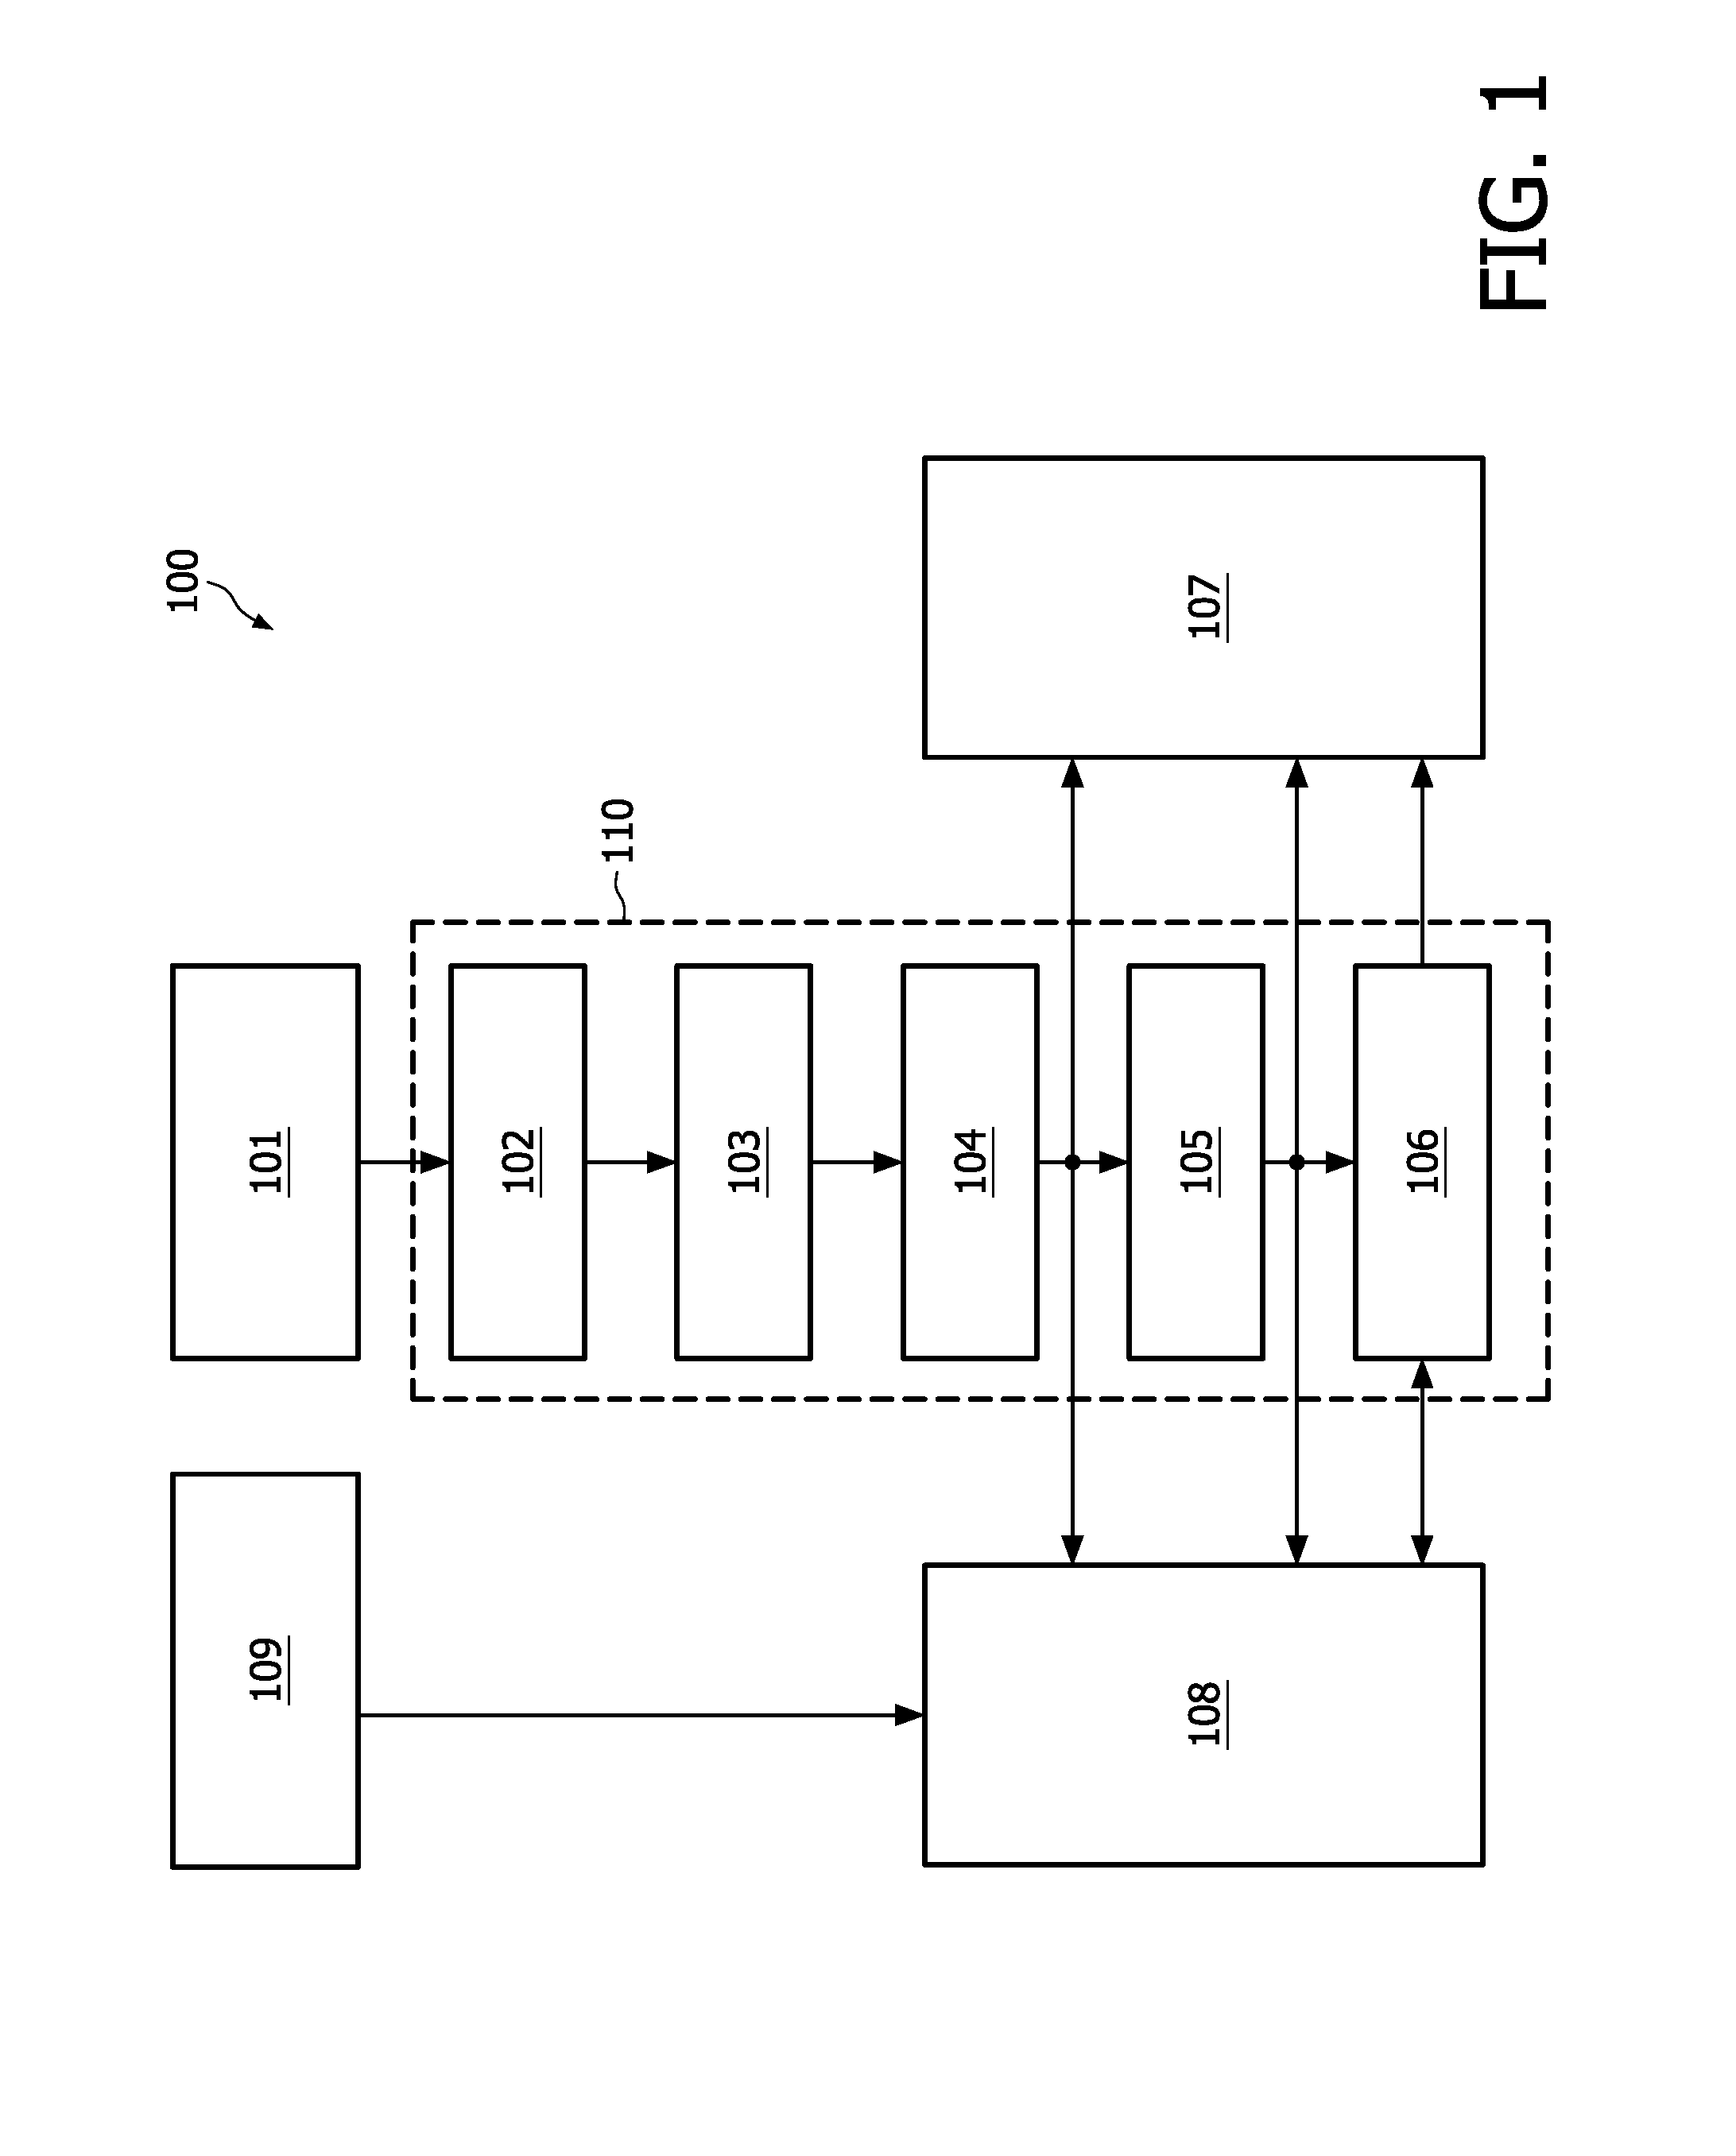 Method and system for sleep/wake condition estimation